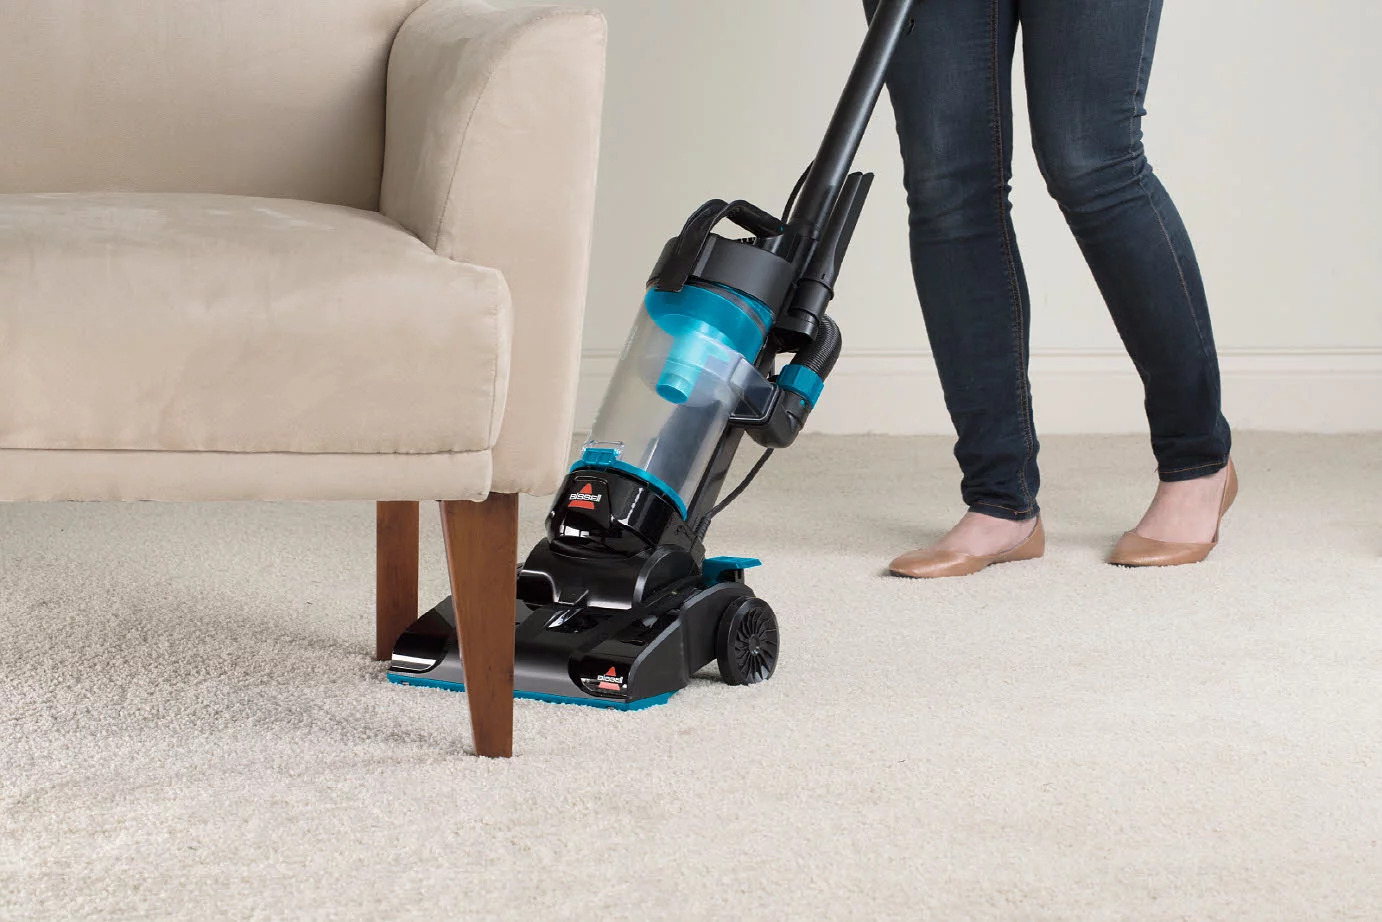 How To Use A Bissell Powerforce Carpet Cleaner